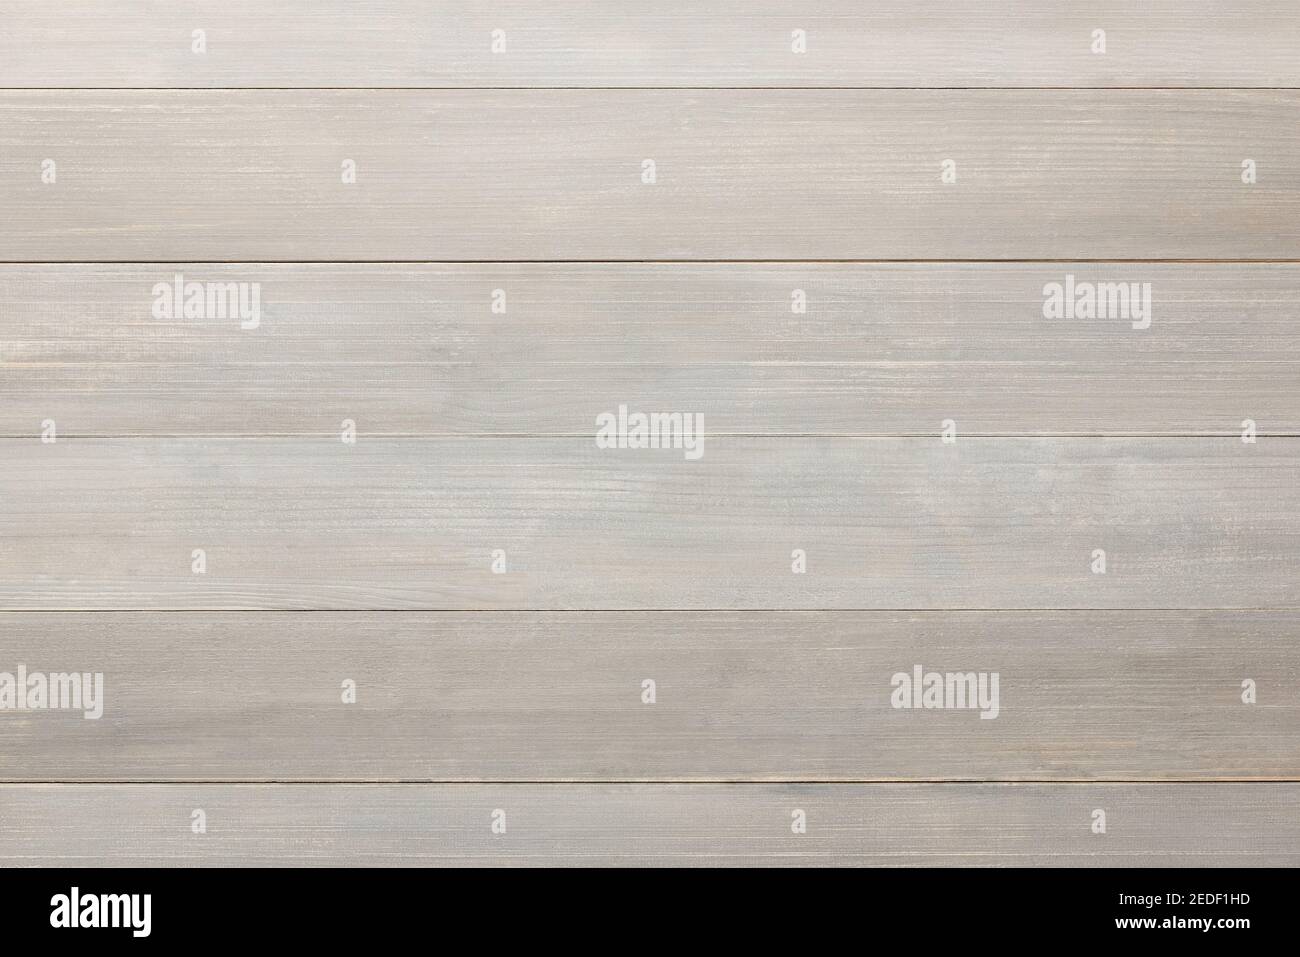 Vintage style light wood panel texture top view for background Stock Photo